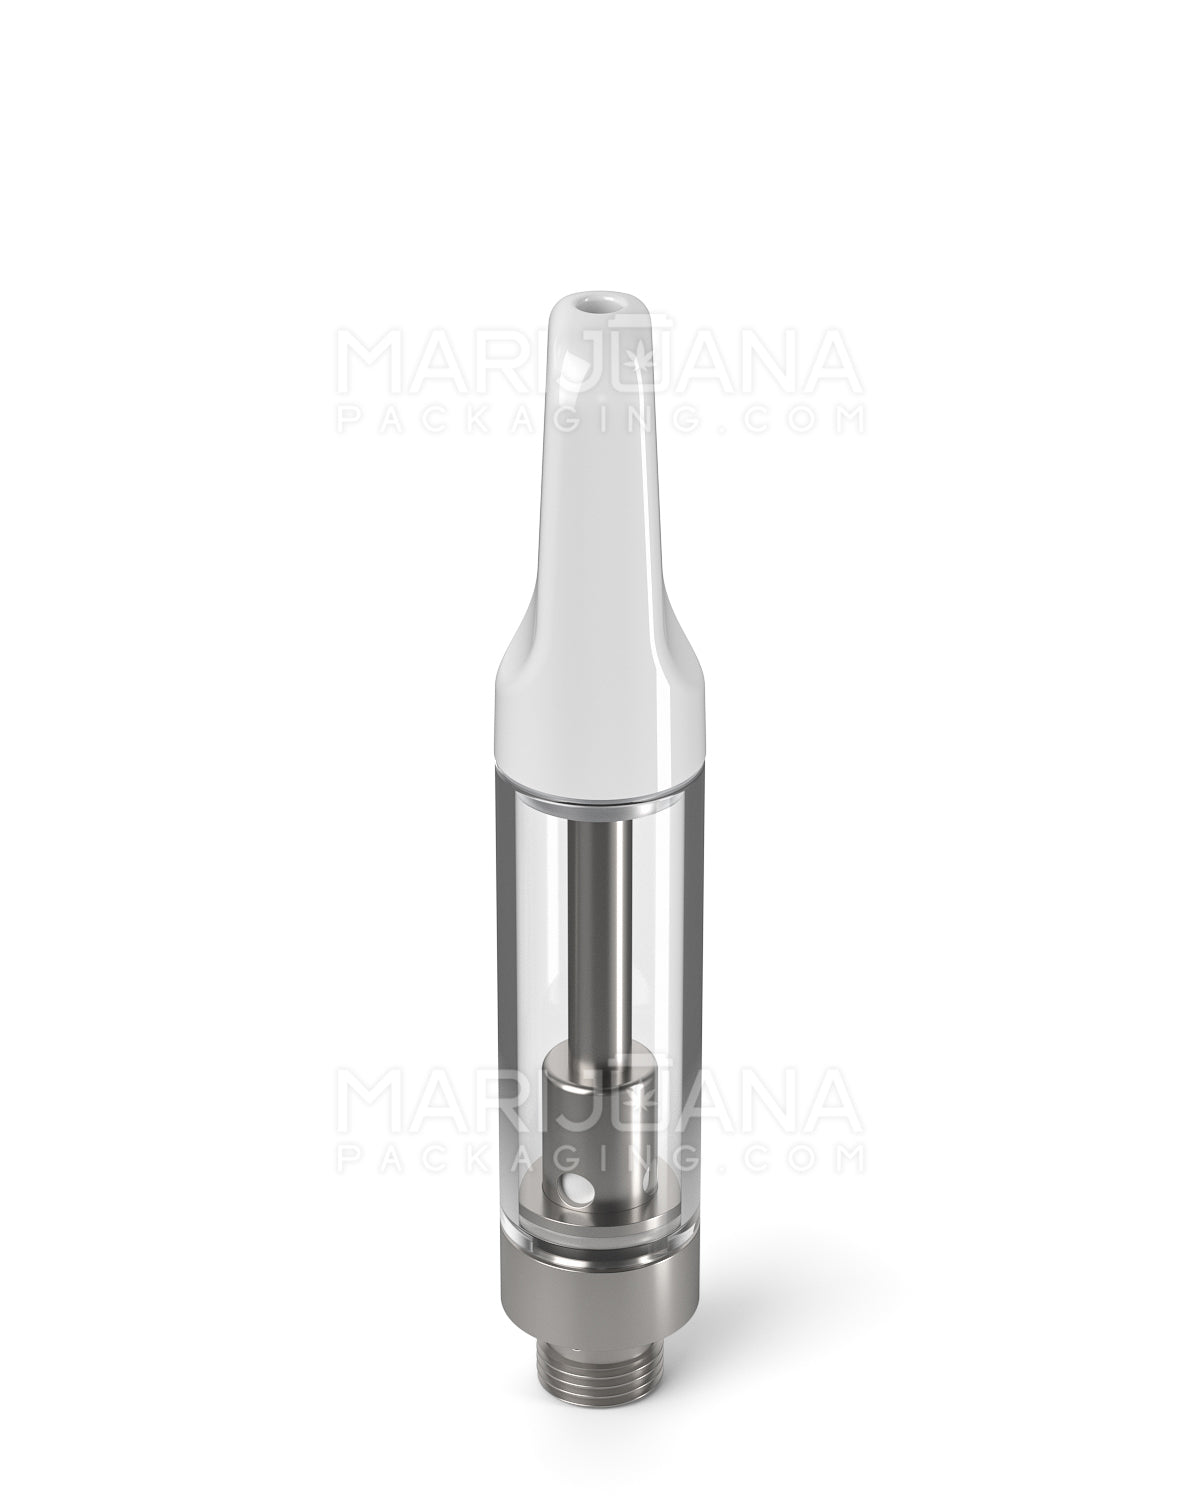 CCELL | Liquid6 Reactor Glass Vape Cartridge with White Ceramic Mouthpiece | 1mL - Screw On - 100 Count - 4